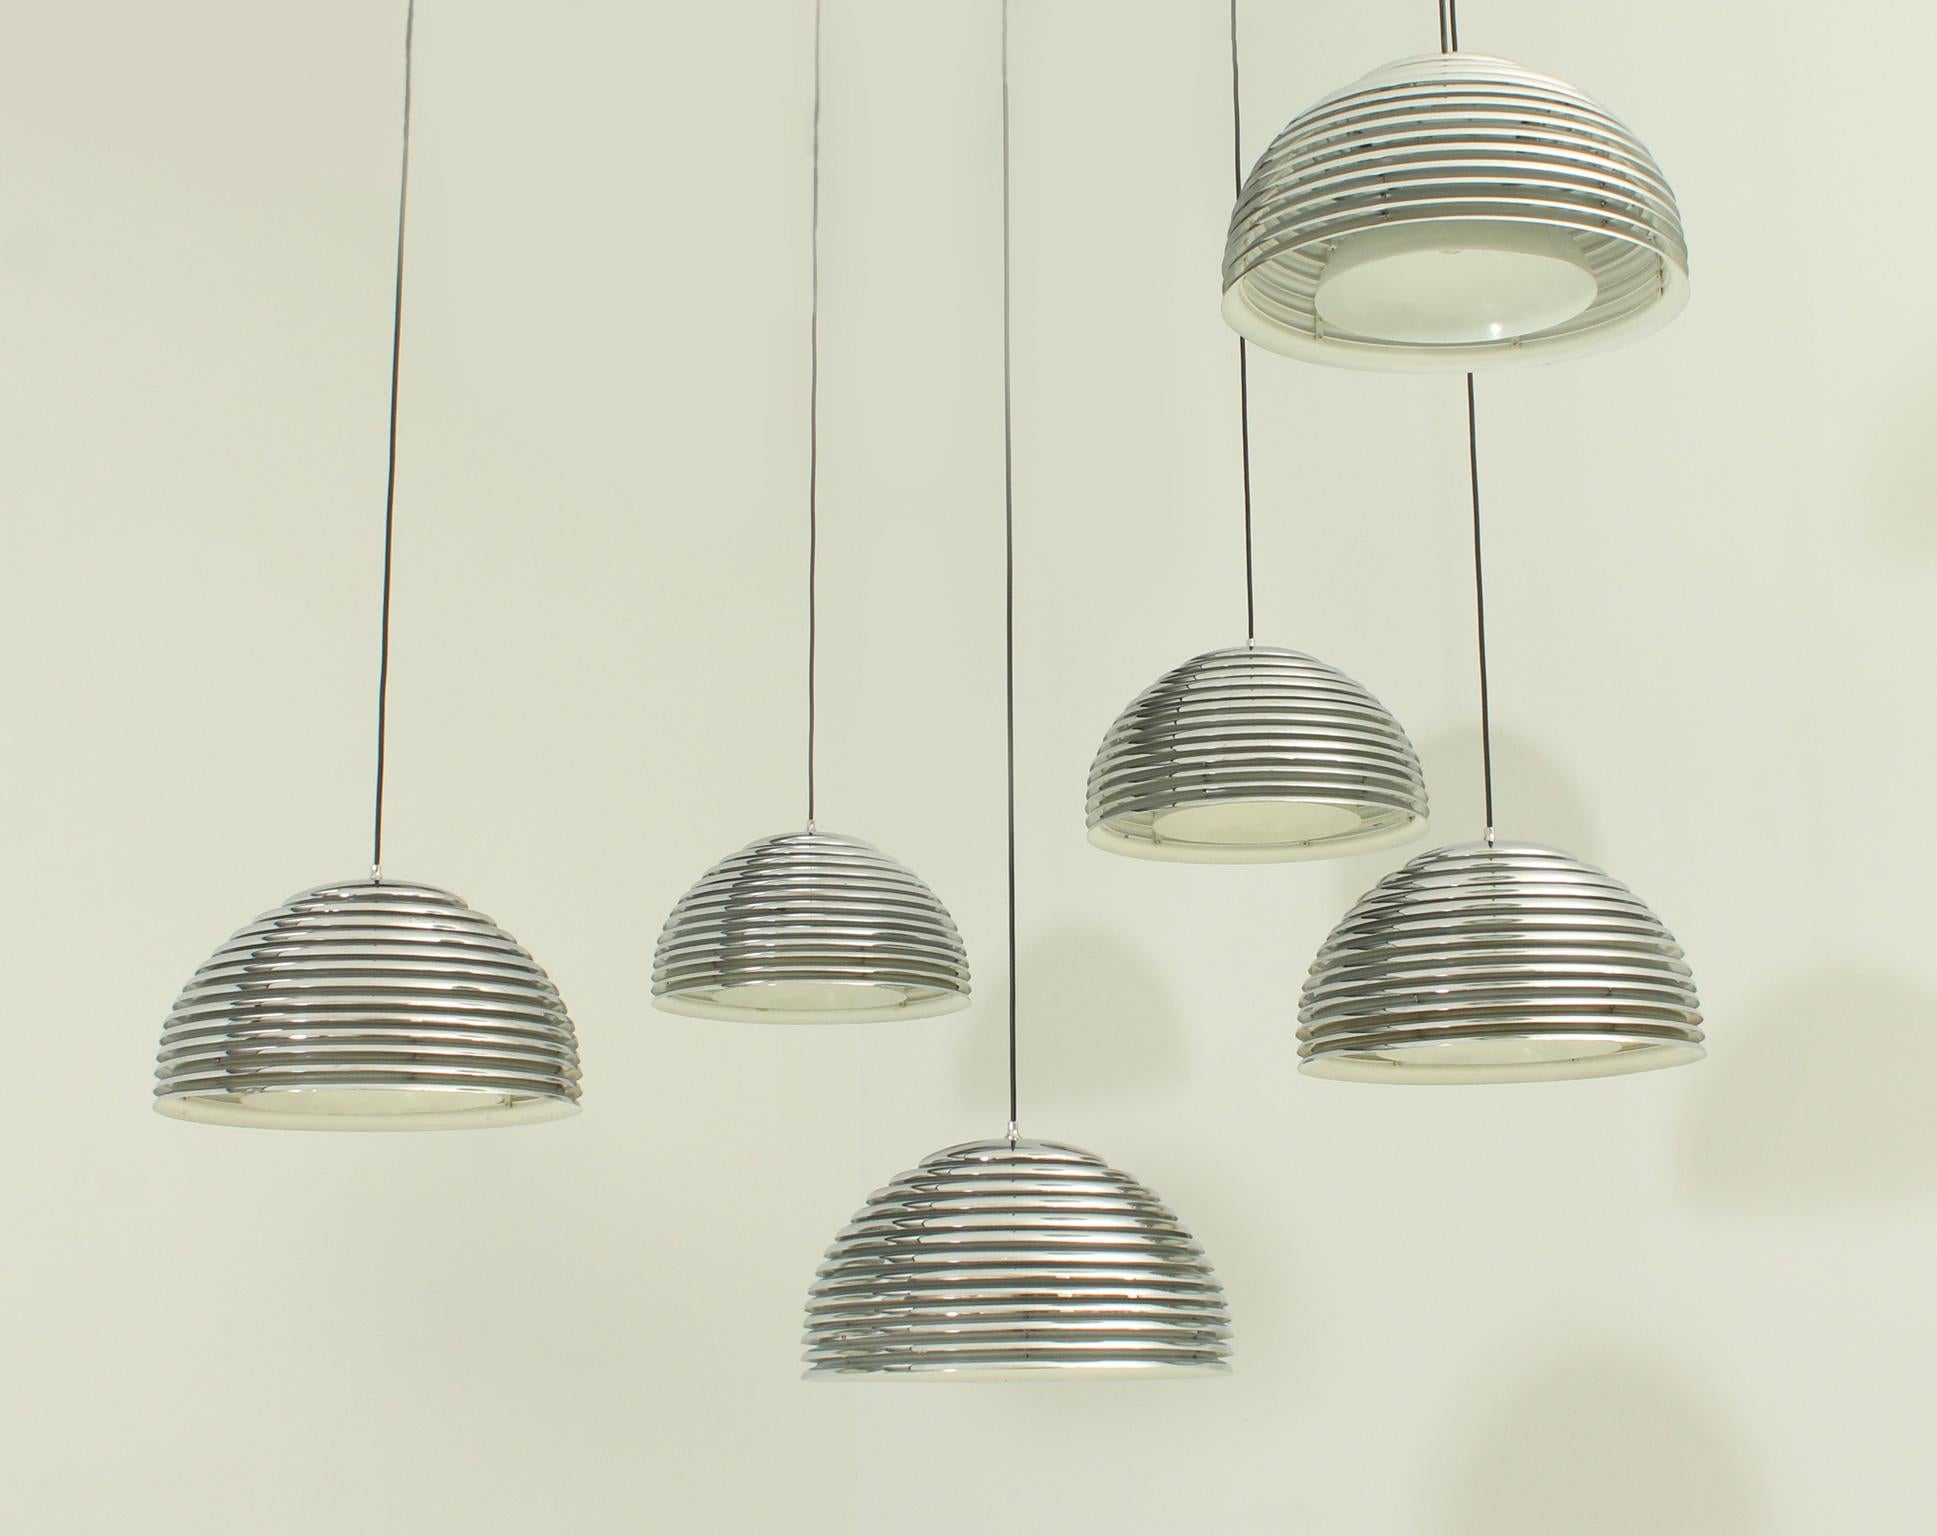 Large Saturno Pendant Lamps by Kazuo Motozawa for Staff, 1972 For Sale 2